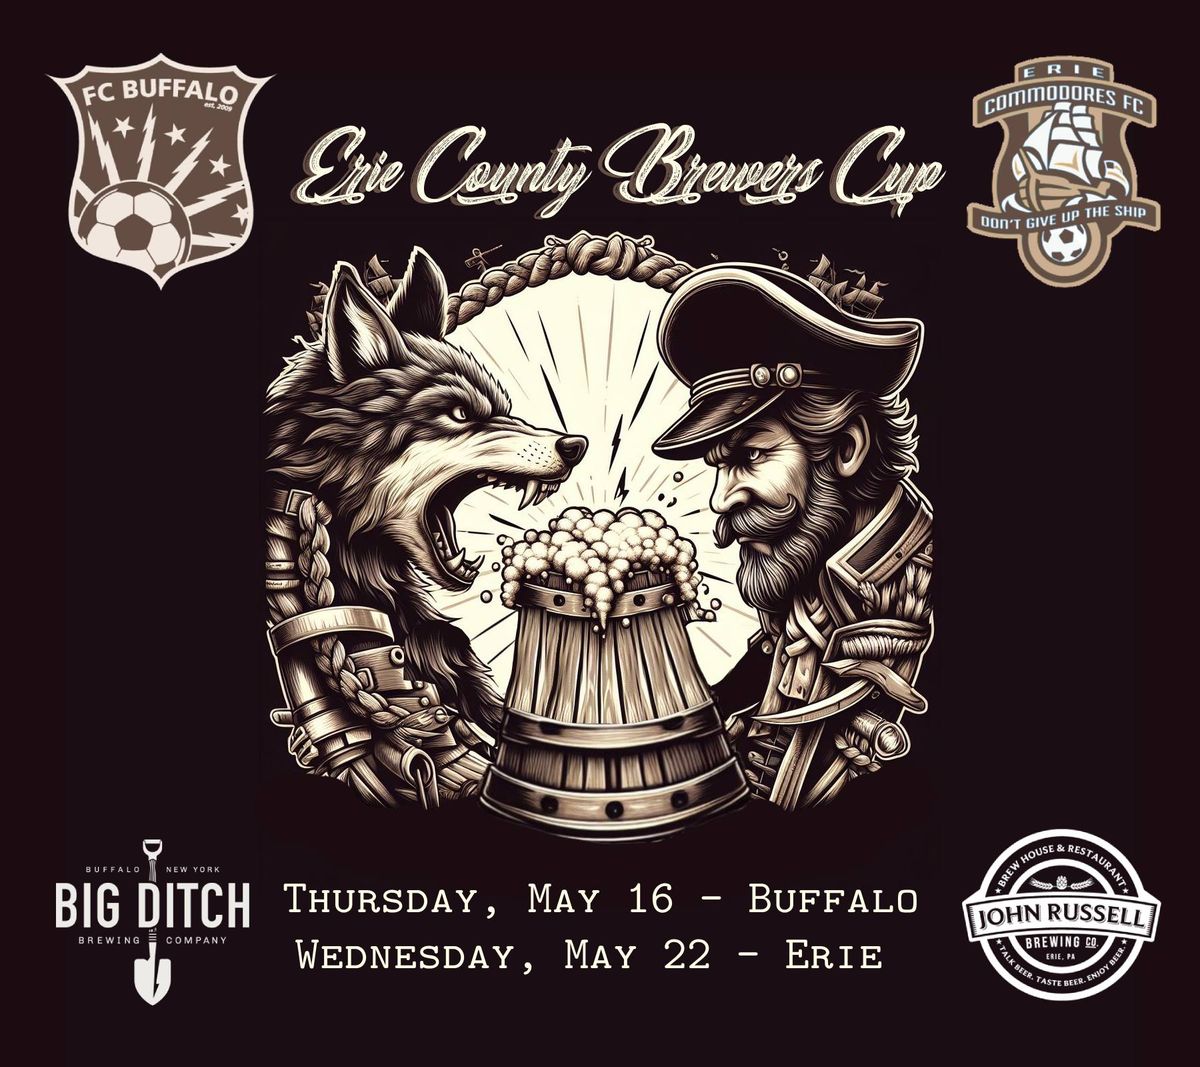 The Brewers Cup \/\/ [ Mens ] Erie Commodores vs. FC Buffalo